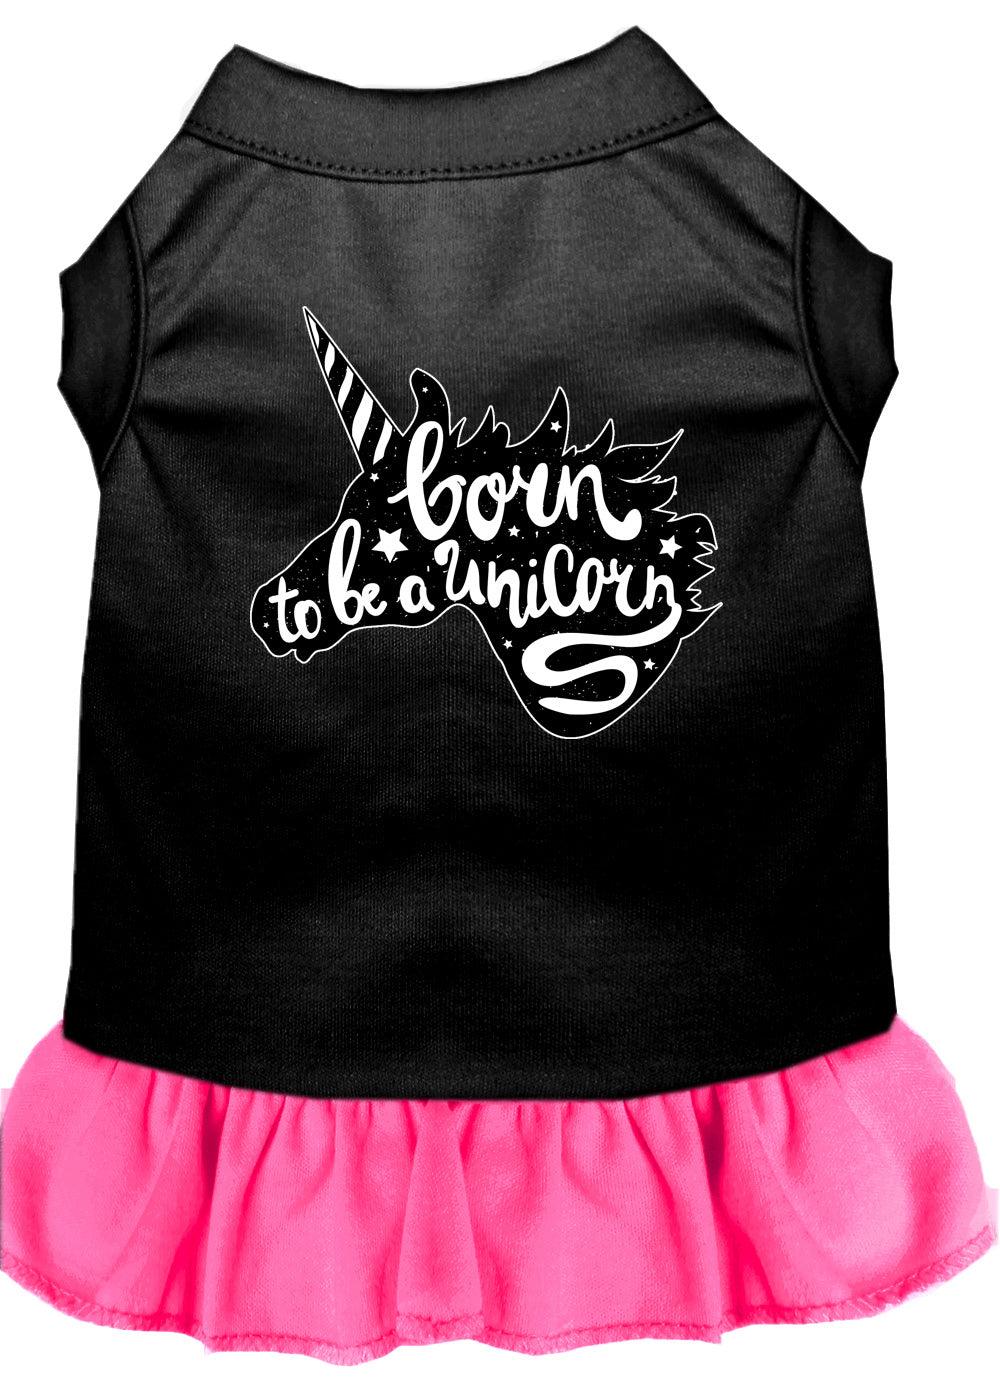 Born to be a Unicorn Screen Print Dog Dress Black with Bright Pink Med - FSSA Global Bullet